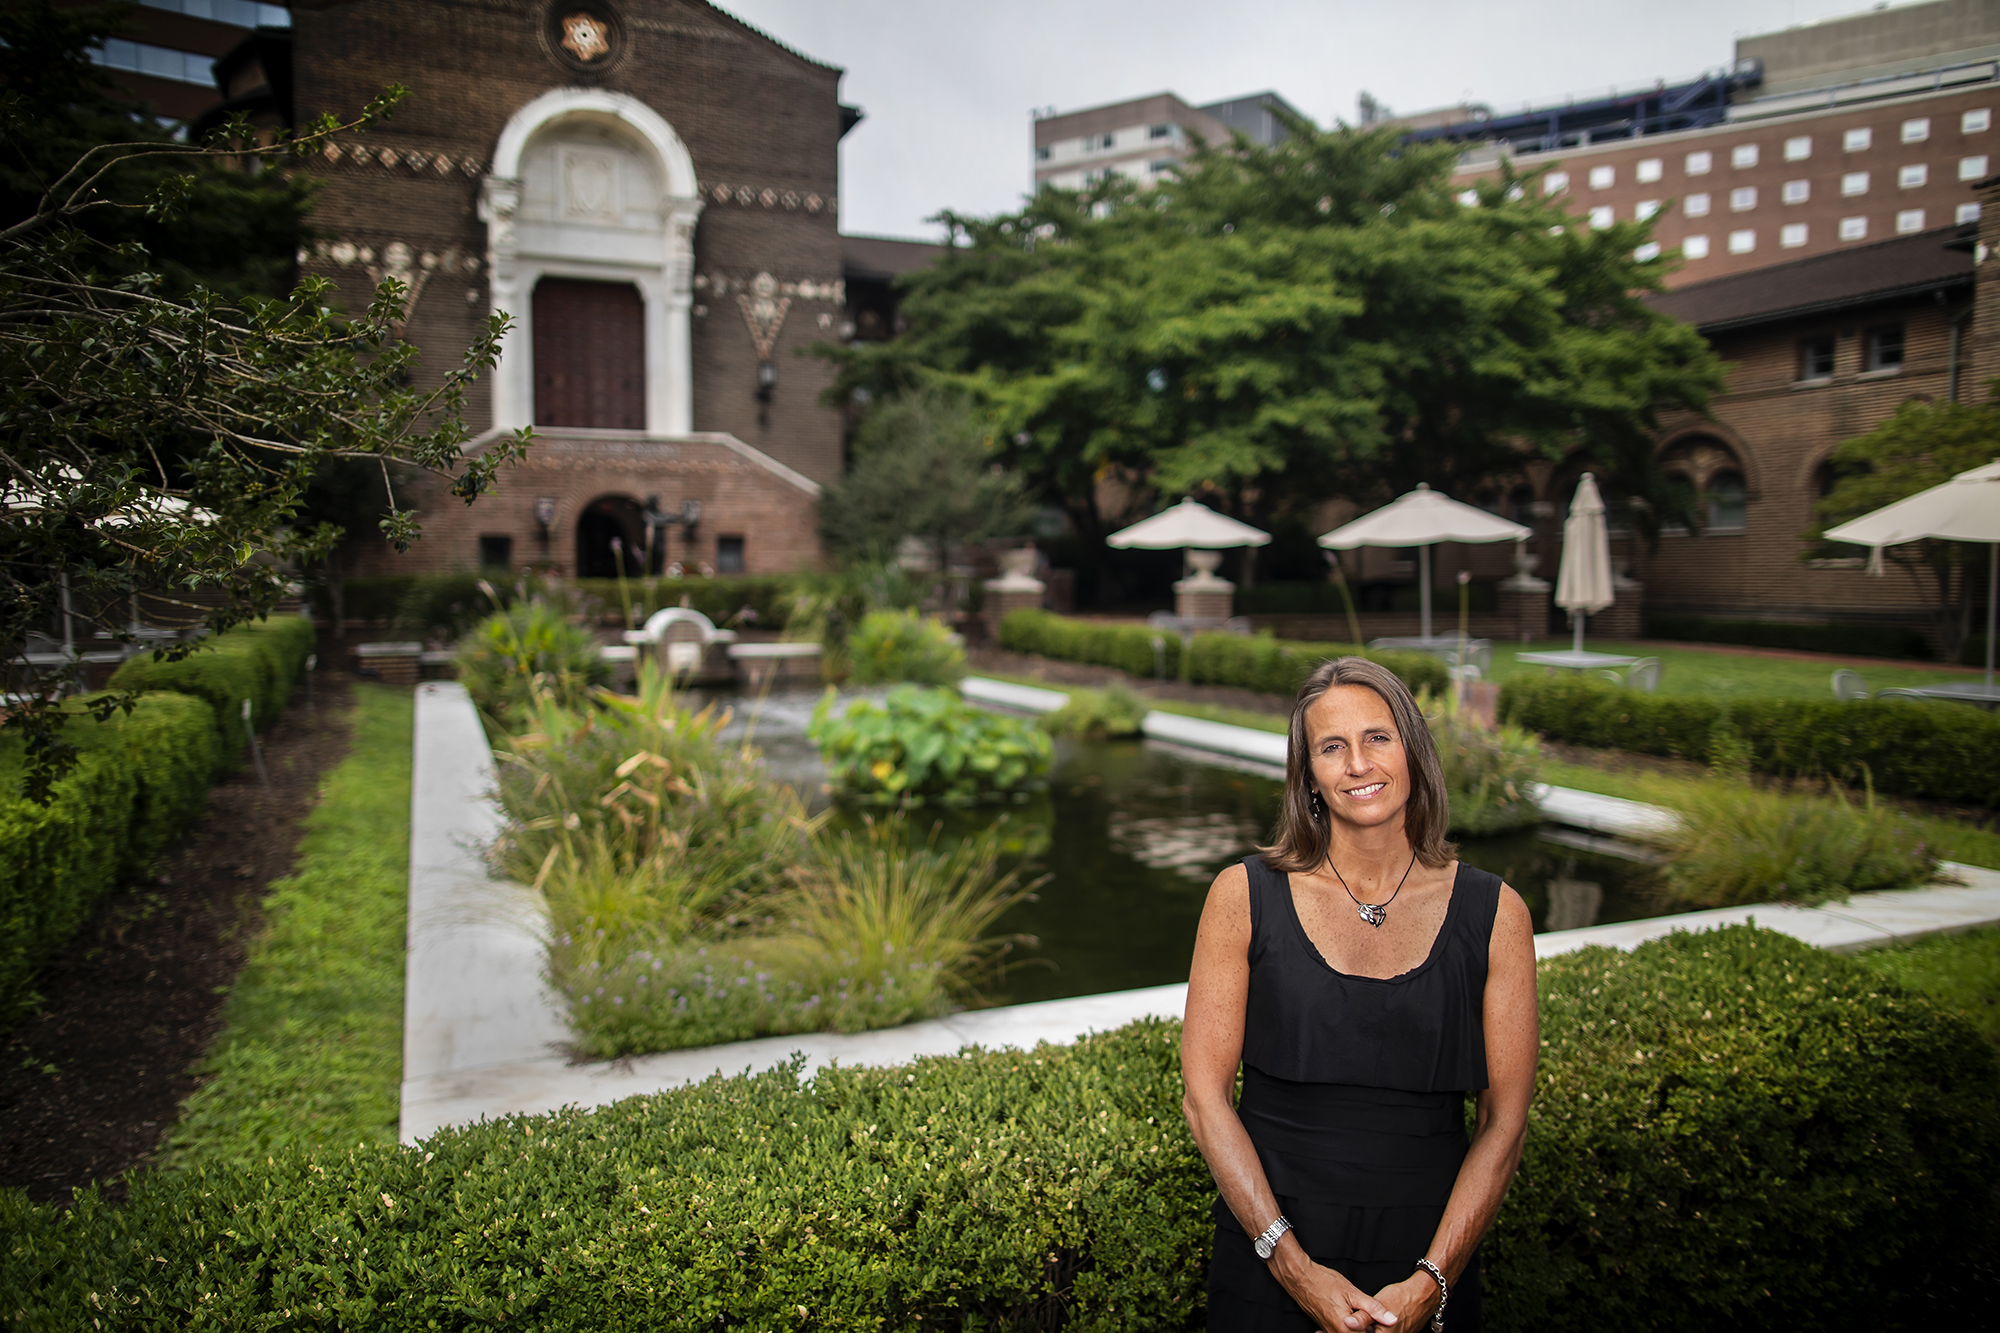 Alanna Shanahan posts in front of the garden at the entrance to the Penn Museum on Spruce Street.